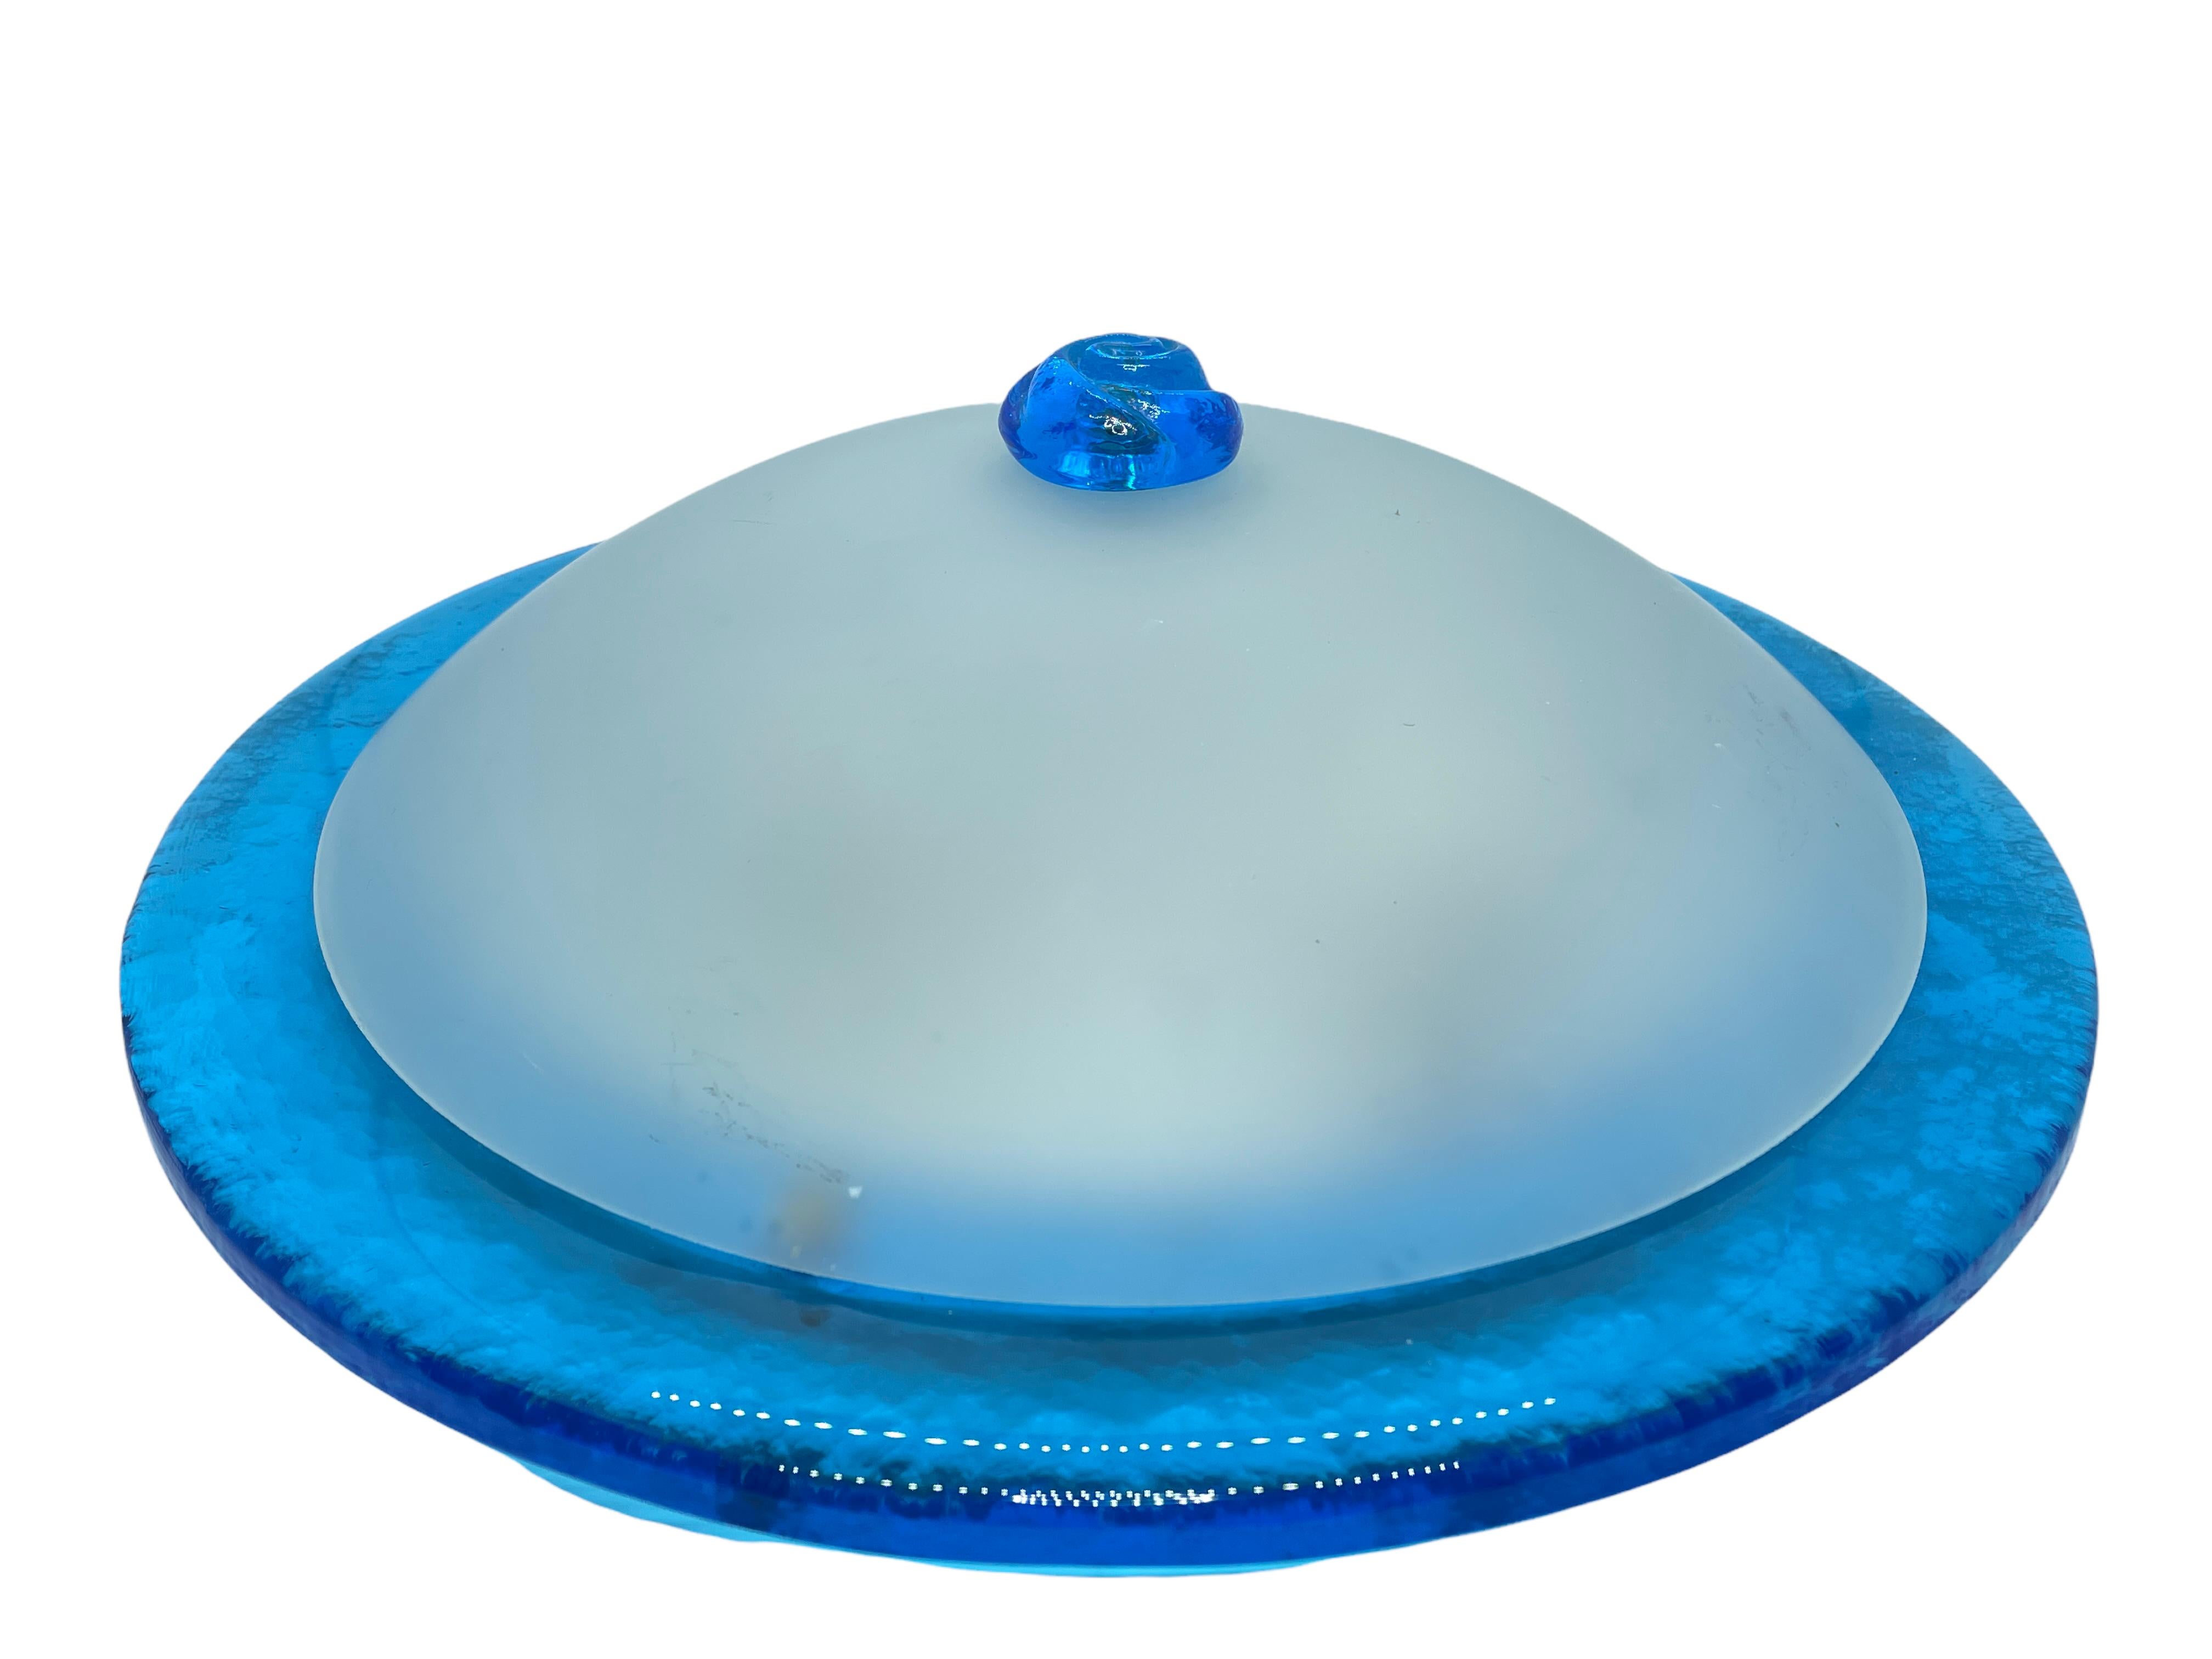 Late 20th Century Blue and Satin Murano Glass Flush Mount Ceiling Light, by Massive Lights 1980s